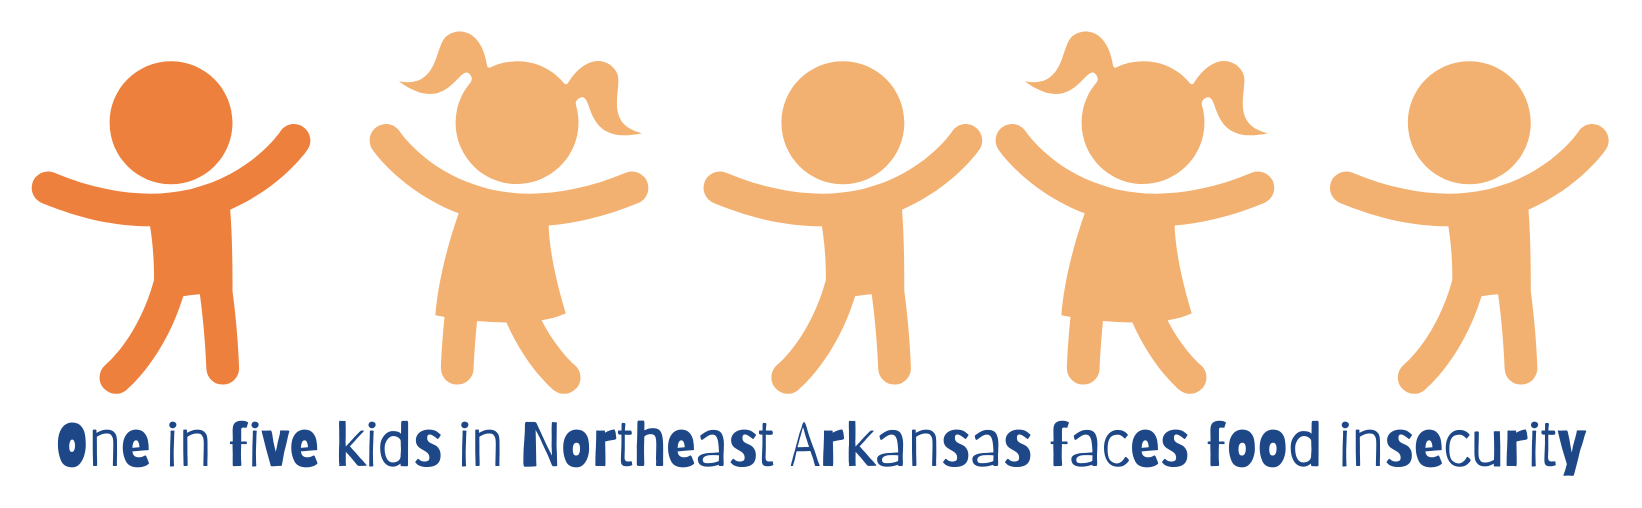 One in five kids in Northeast Arkansas faces food insecurity